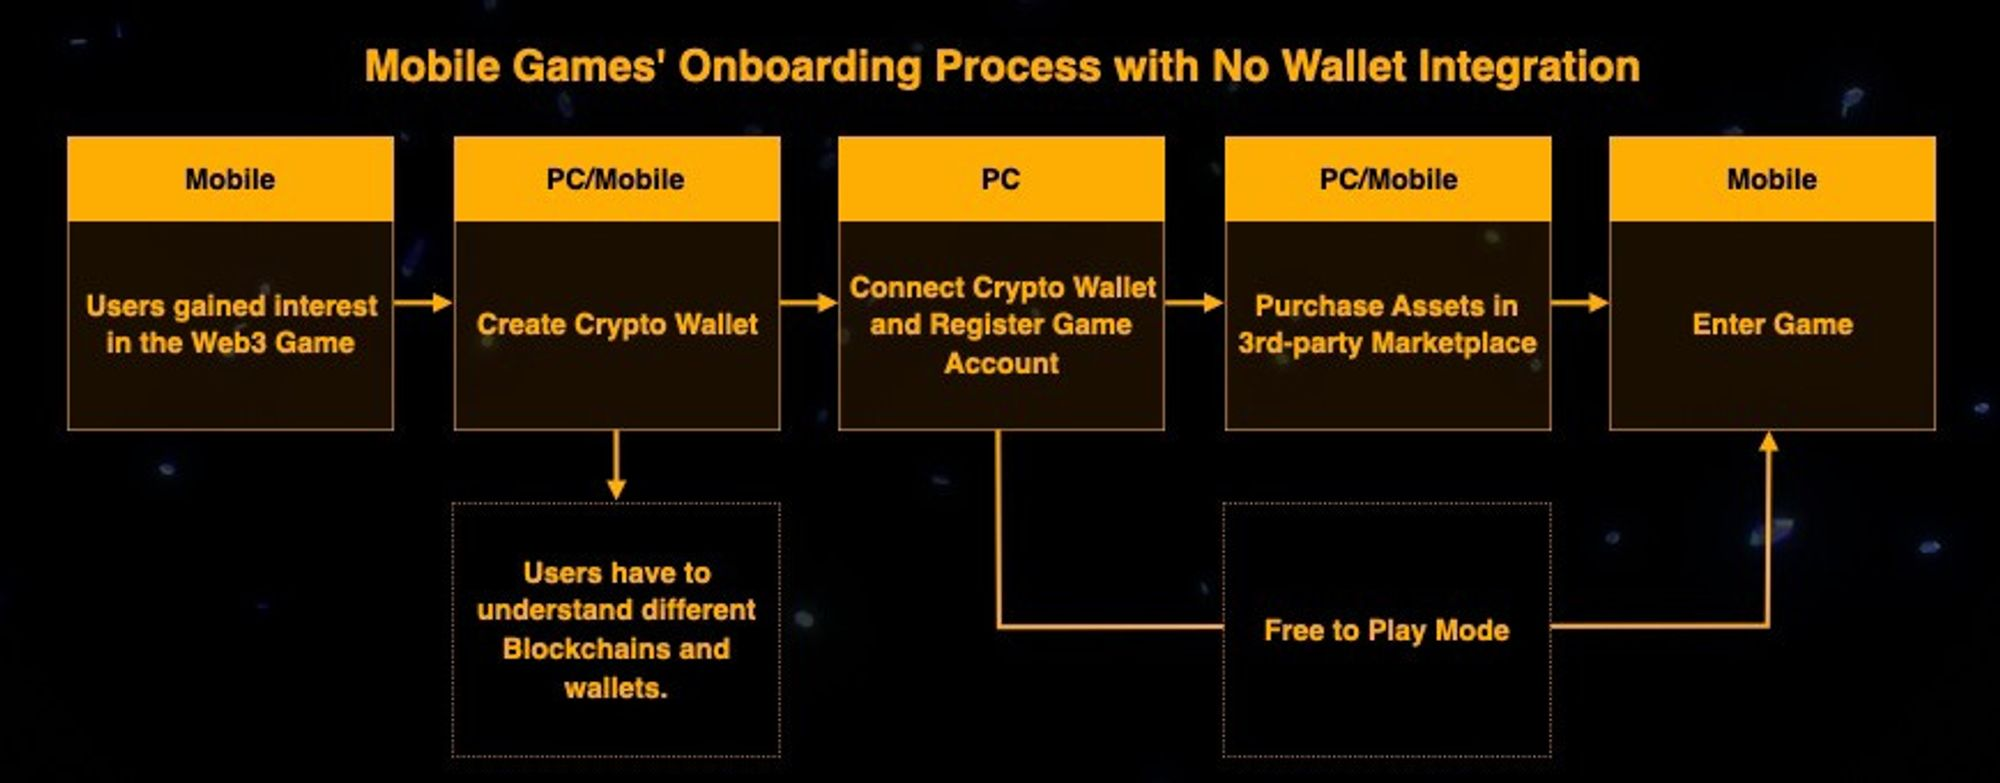 Crypto mobile games’ onboardin process with no wallet integration